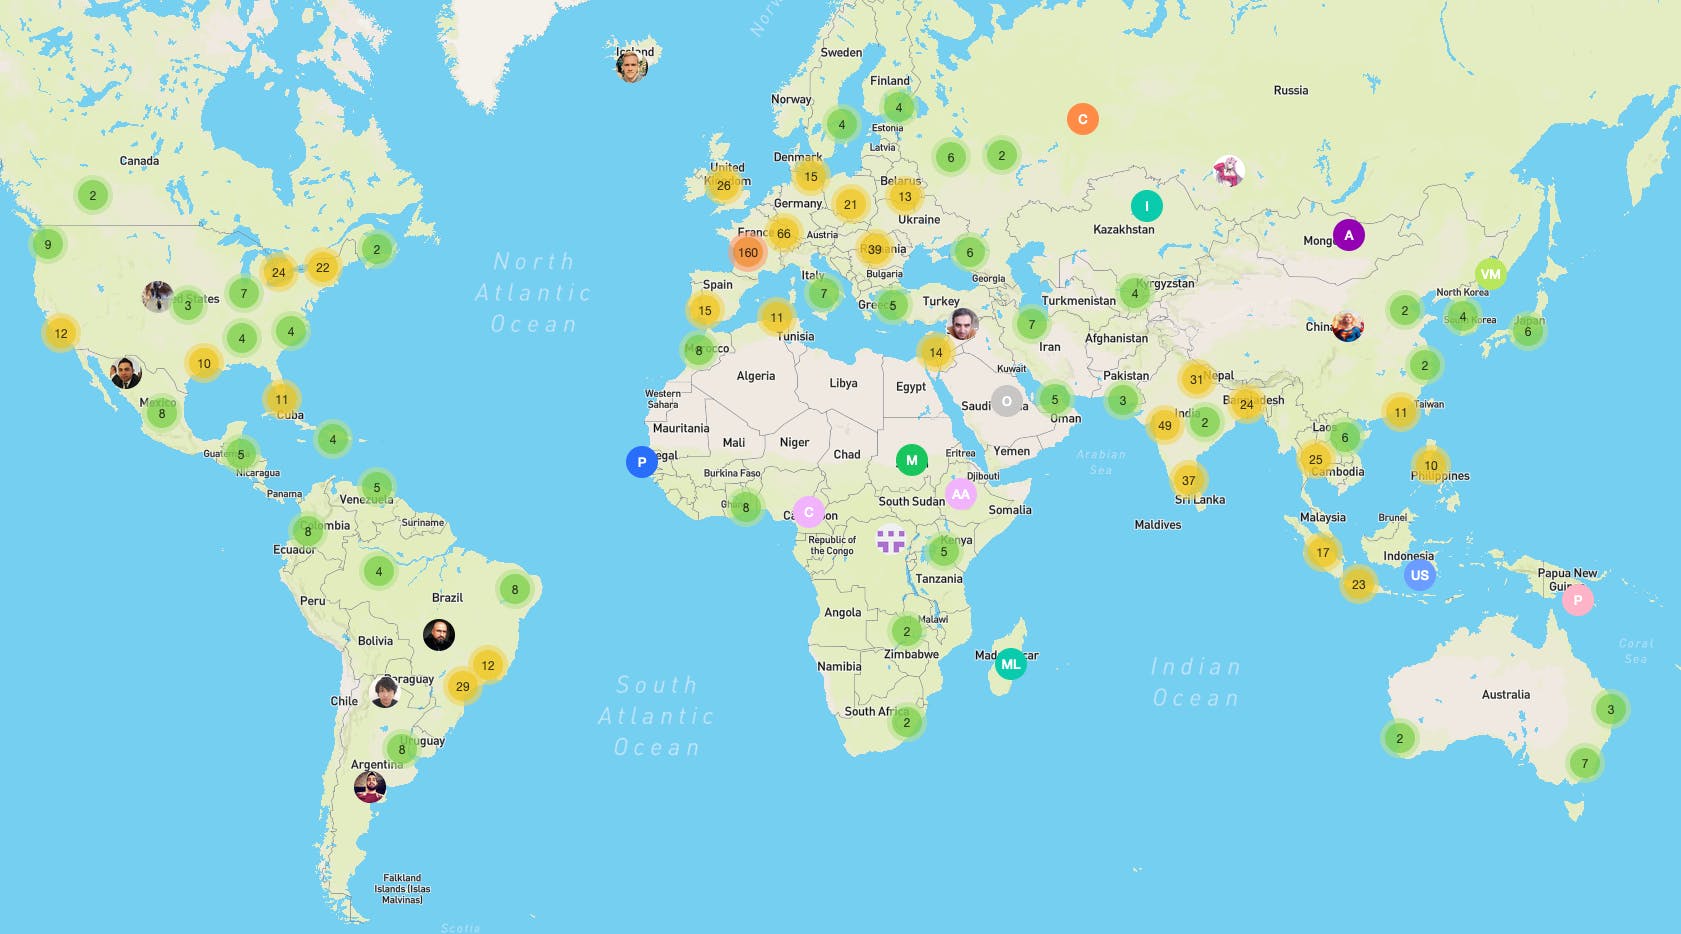 3004 developers from more than 110 countries use Qovery